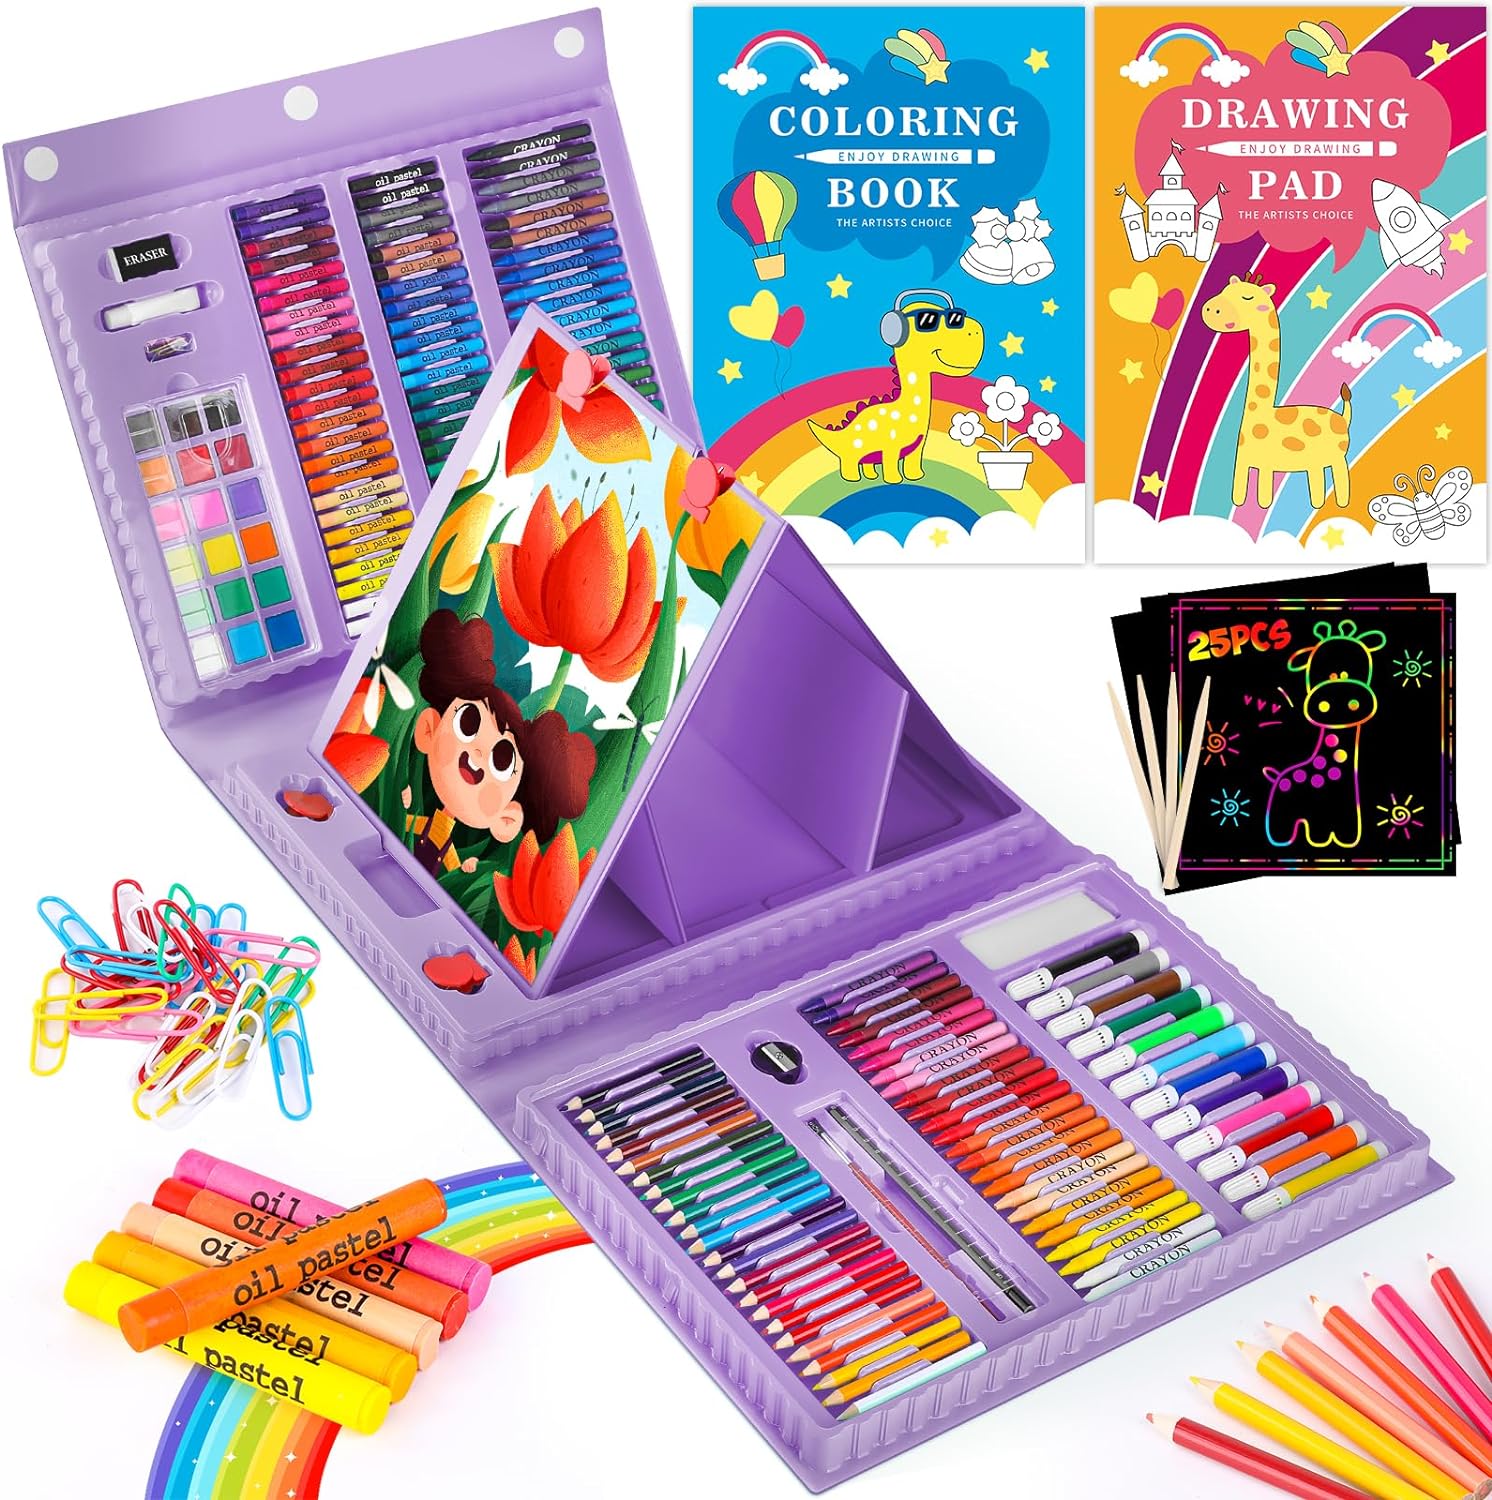 This is the perfect gift for anyone not just kids. We got this for my husband' daughter and of all her gifts it was her favorite. She even got a tablet and she loved this art kit more. It has a built in easel with clips and it works great. I woulda definitely recommend this to anyone who has kids or even adults who maybe travel and enjoy art. It' not a professional art kit but it' perfect for beginners or anyone who just enjoys their artsy side. I can't say enough positive things about this p